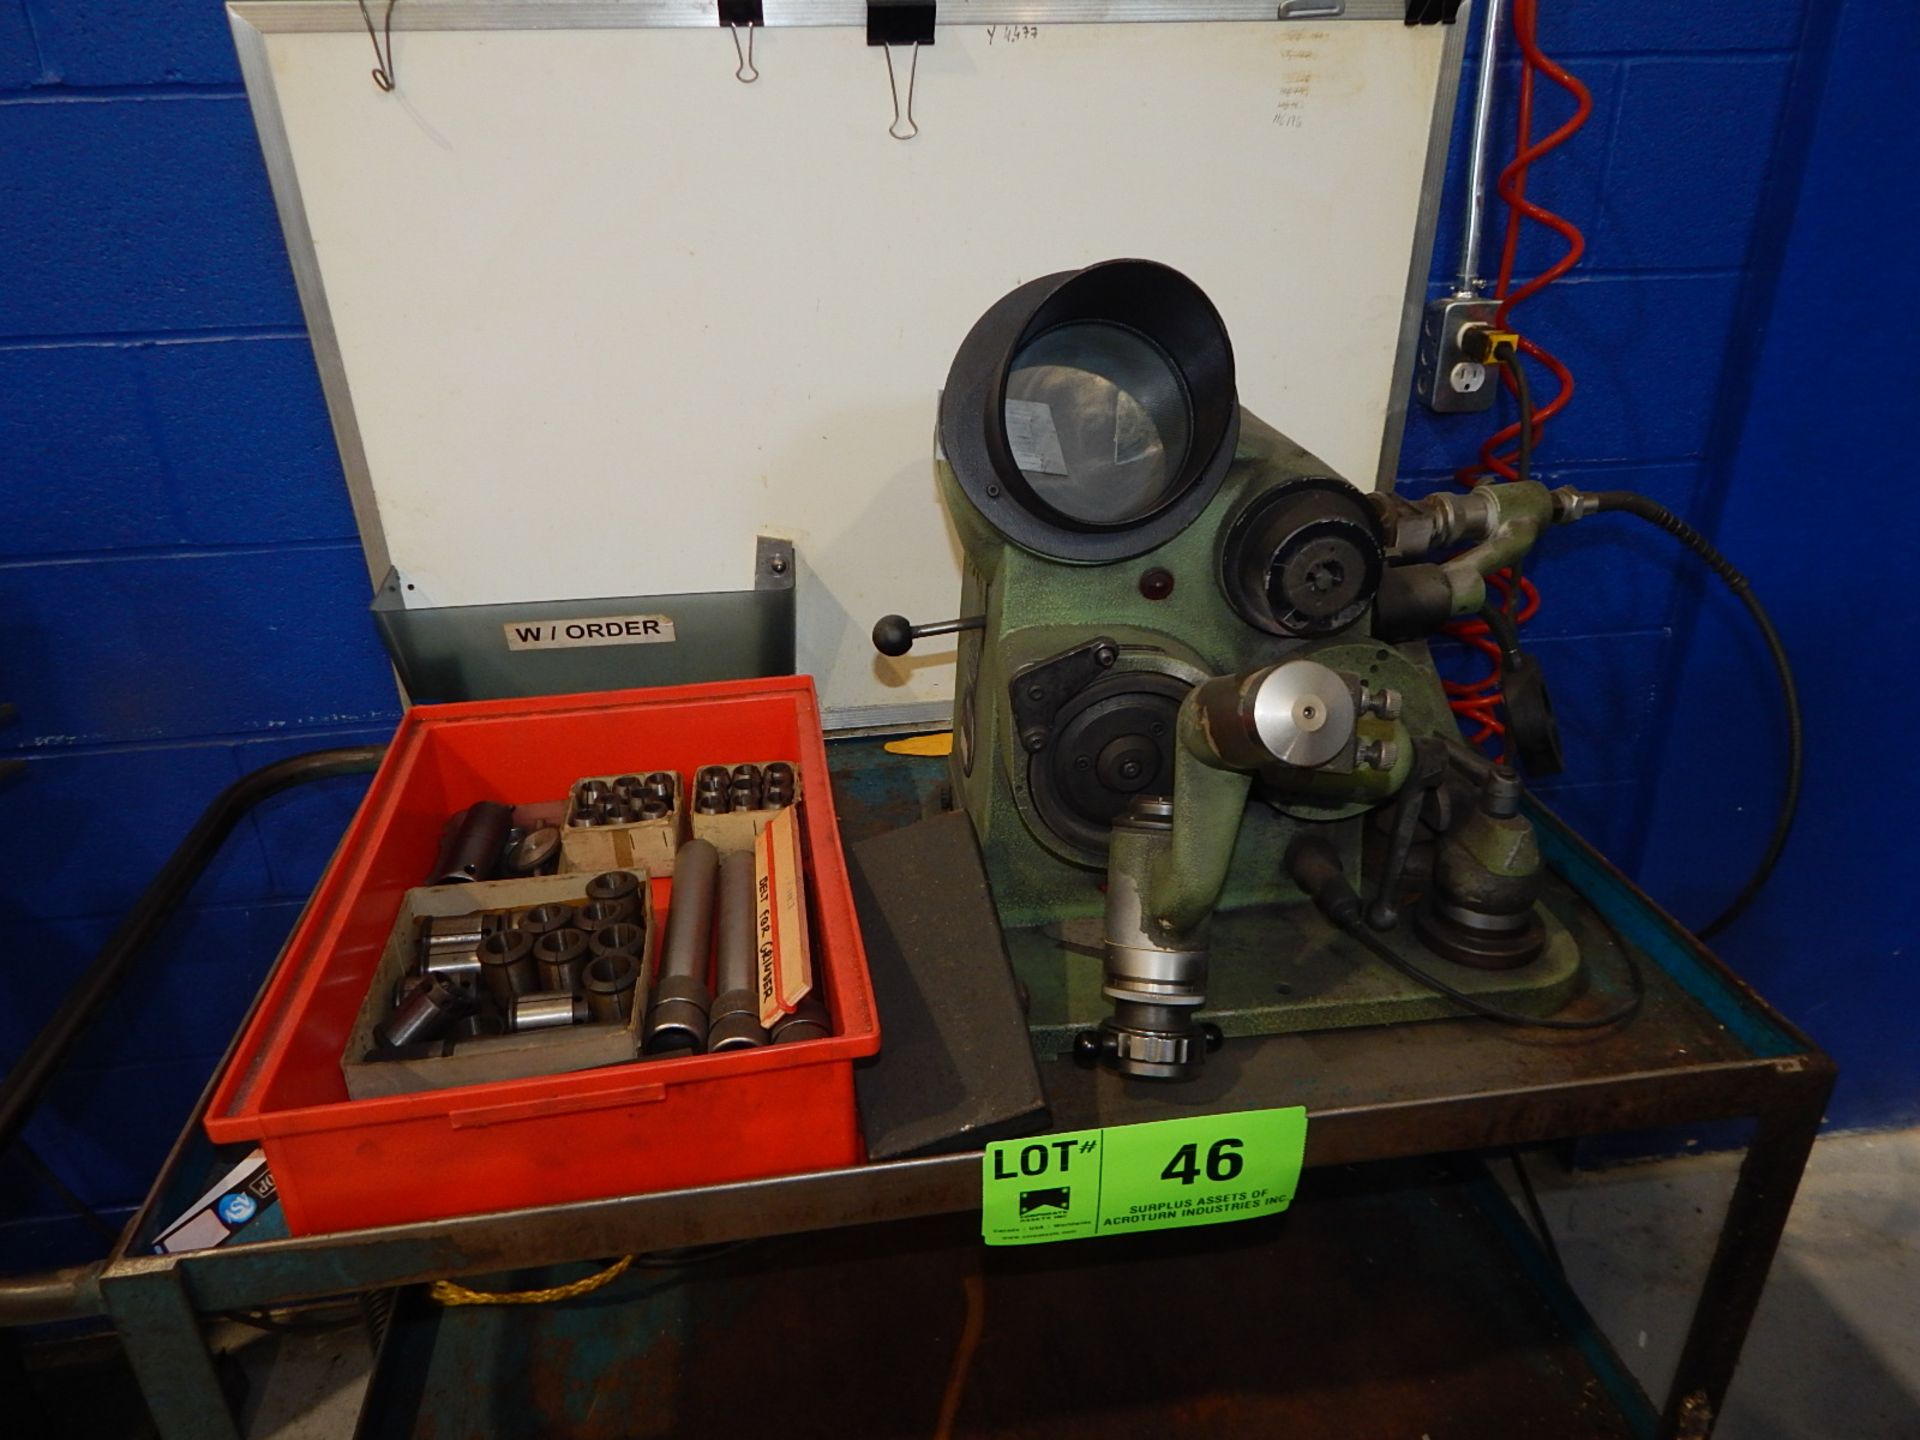 OPTIMA TOOL AND CUTTER GRINDER, S/N B176.65